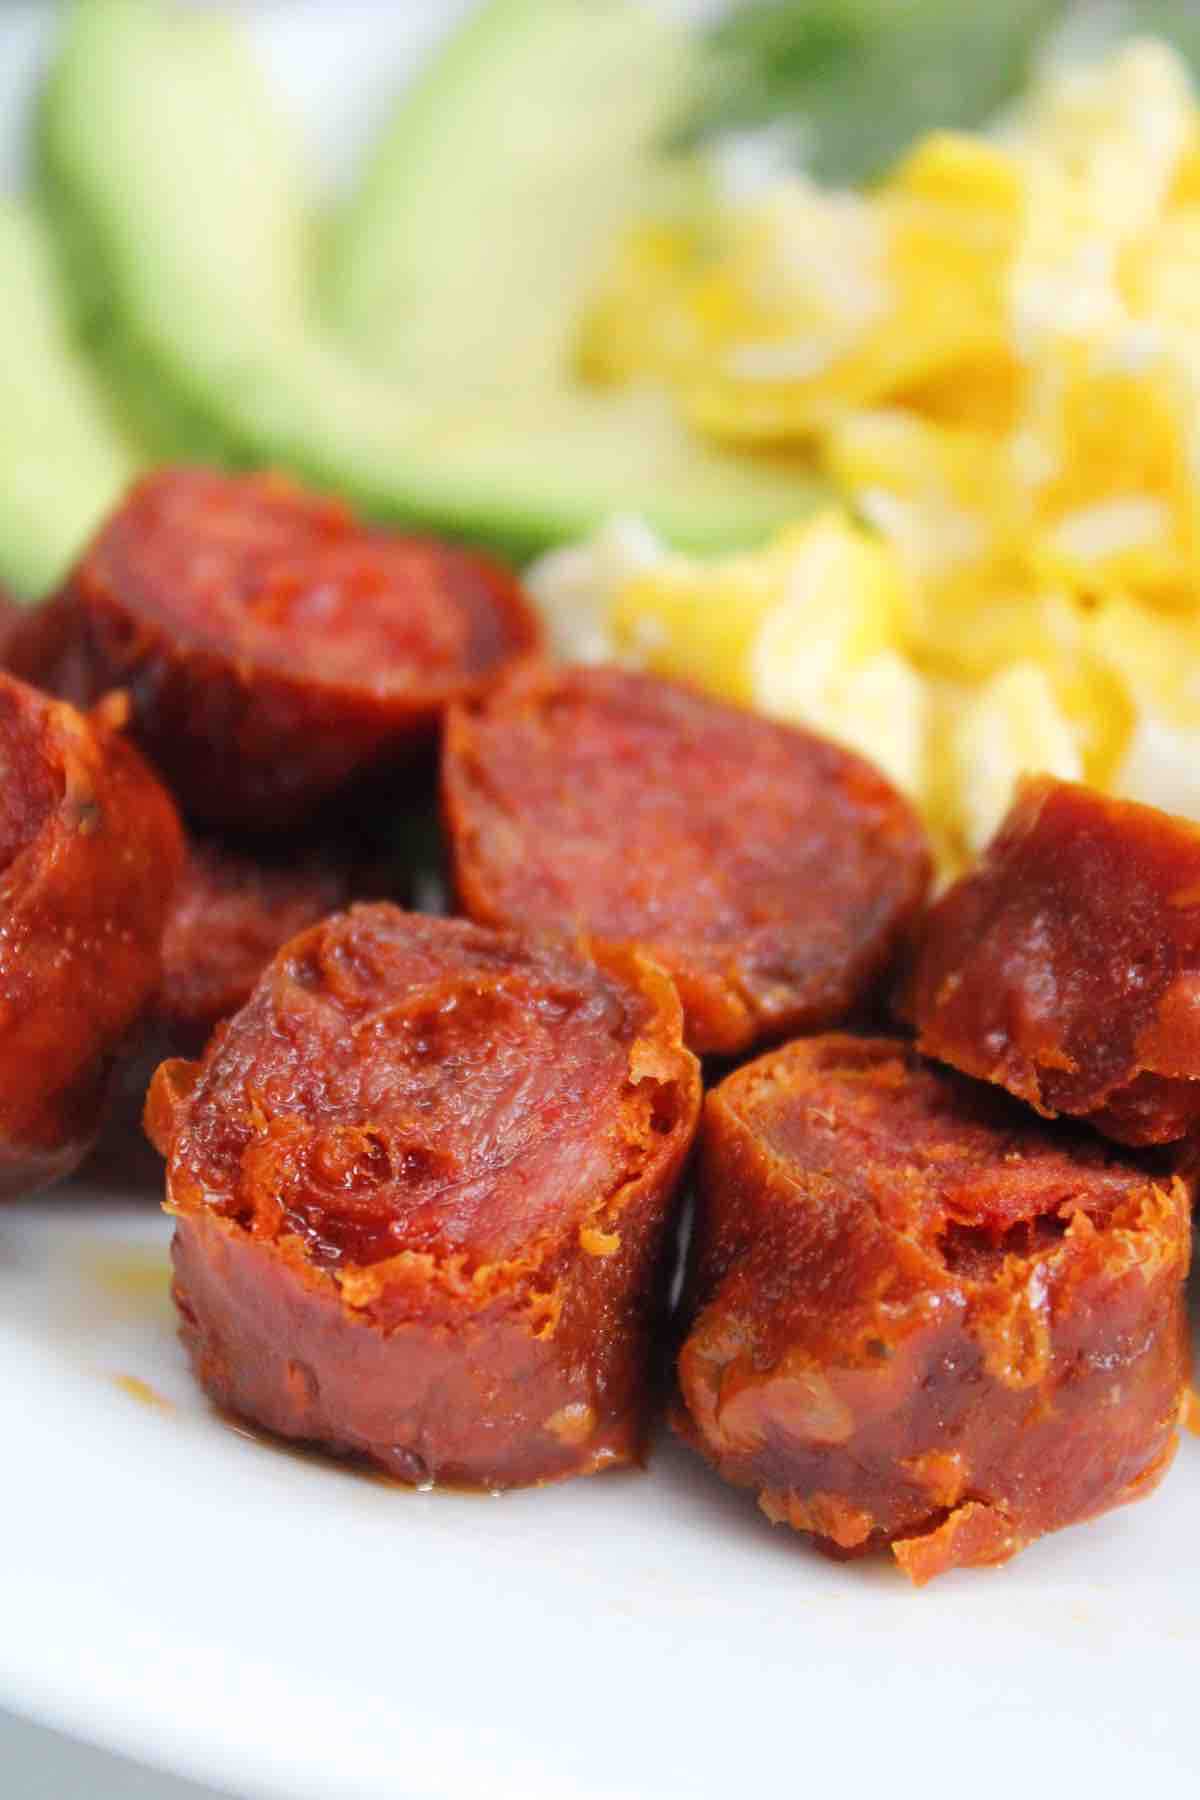 Make sure to buy Mexican or Spanish chorizo in the casing as the primary ingredient shown in the picture.